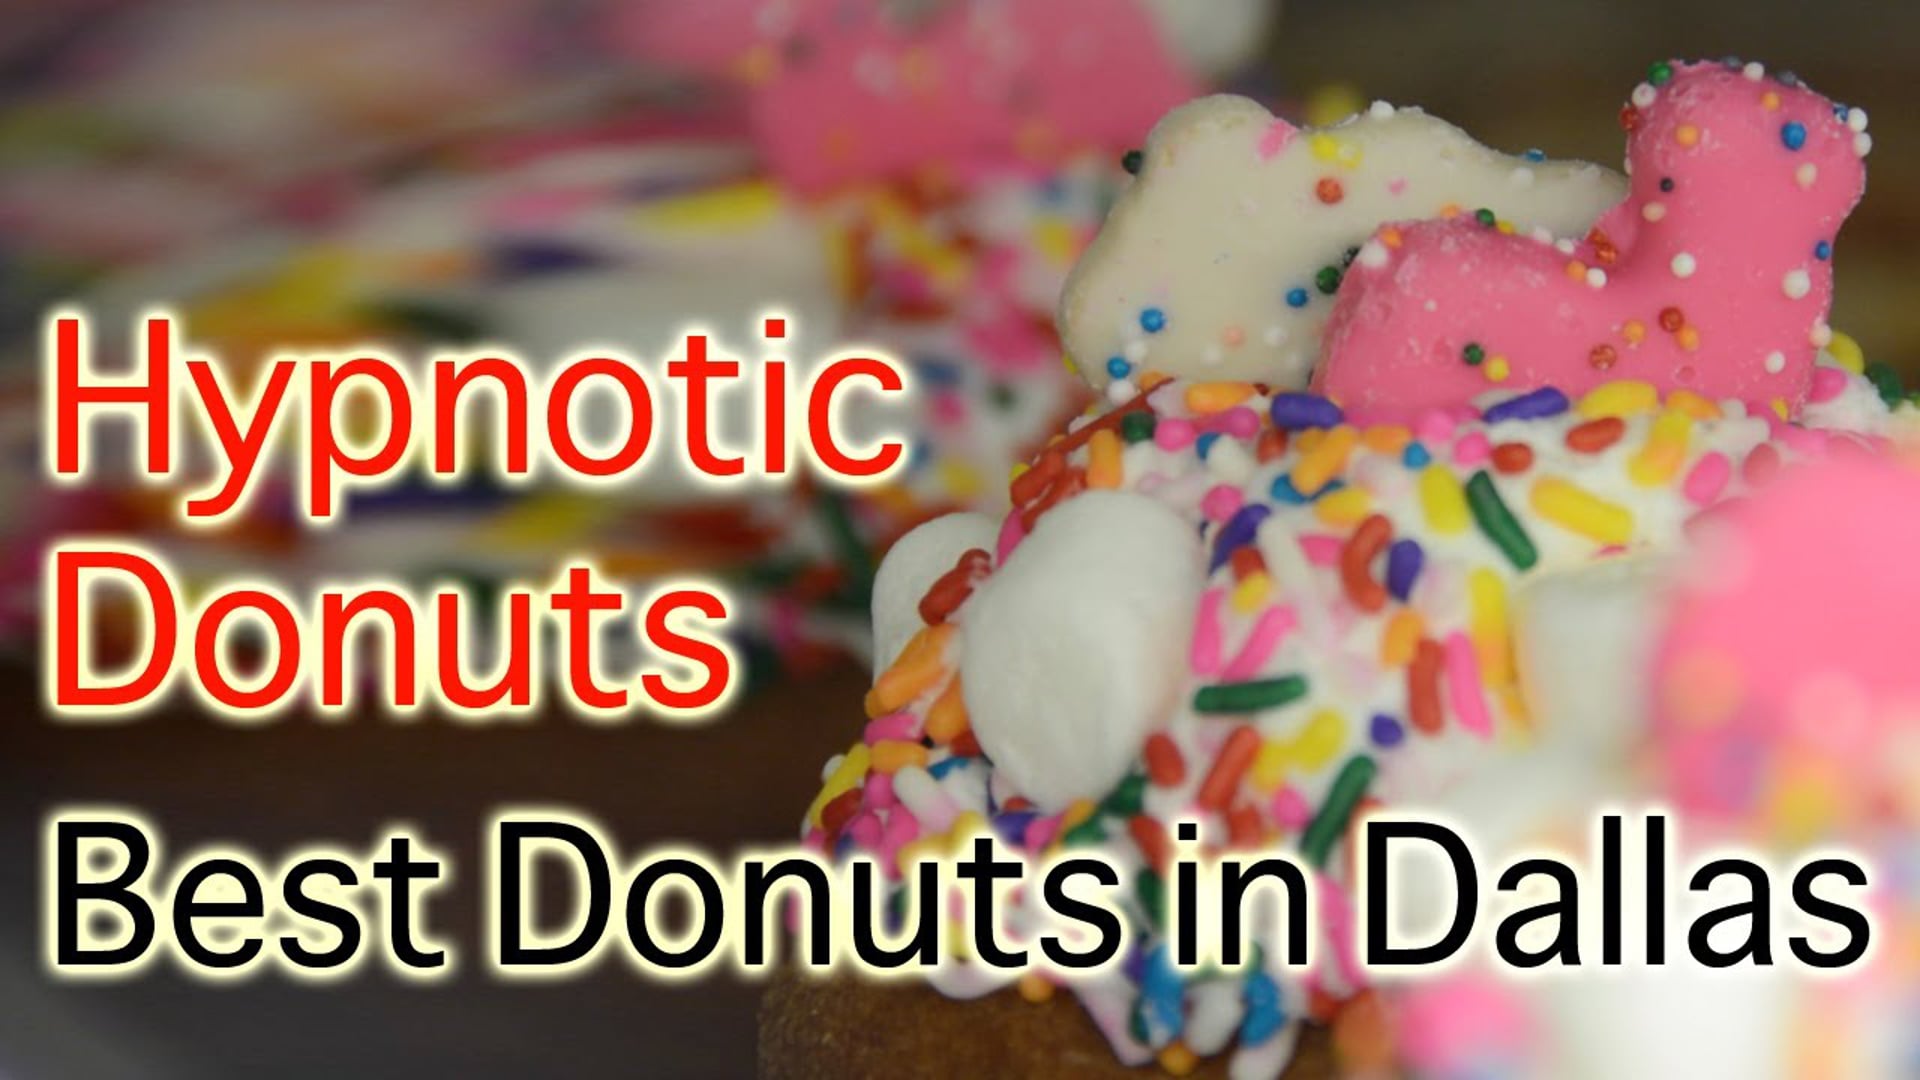 Hypnotic Donuts and Biscuits Donut Shop - Wacky Crazy Wild Donuts